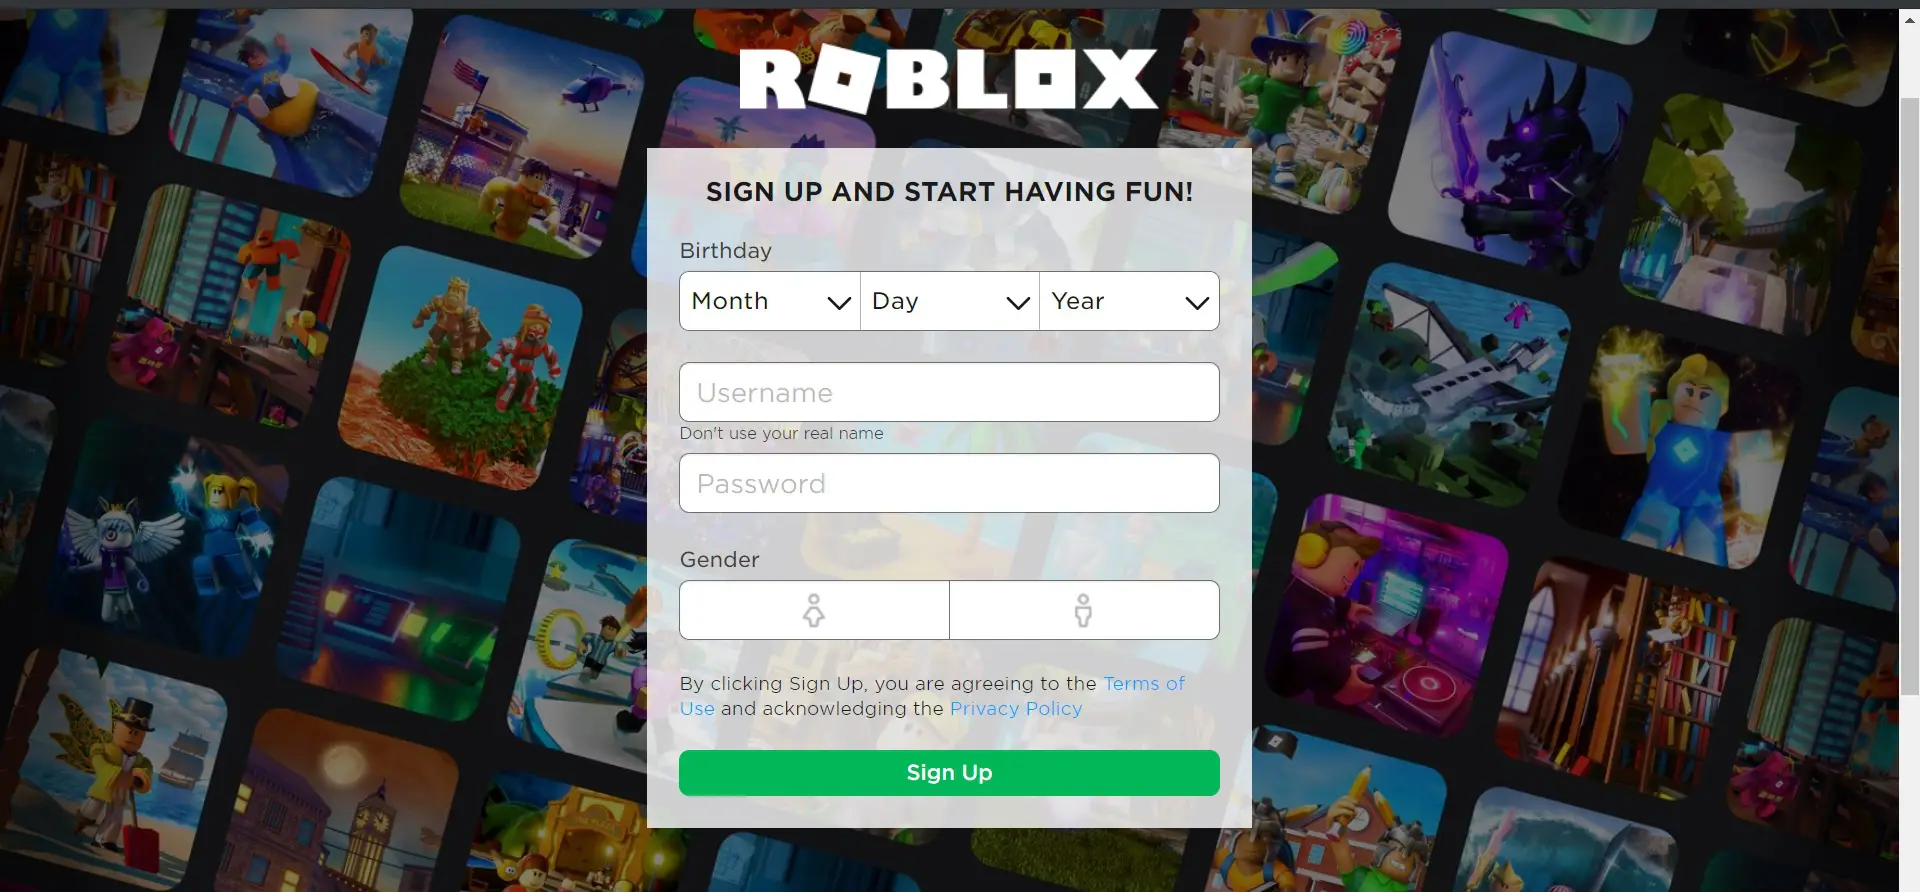 15 Best Roblox Games To Play In 2020 Must Play - roblox vehicle simulator codes 2019 november